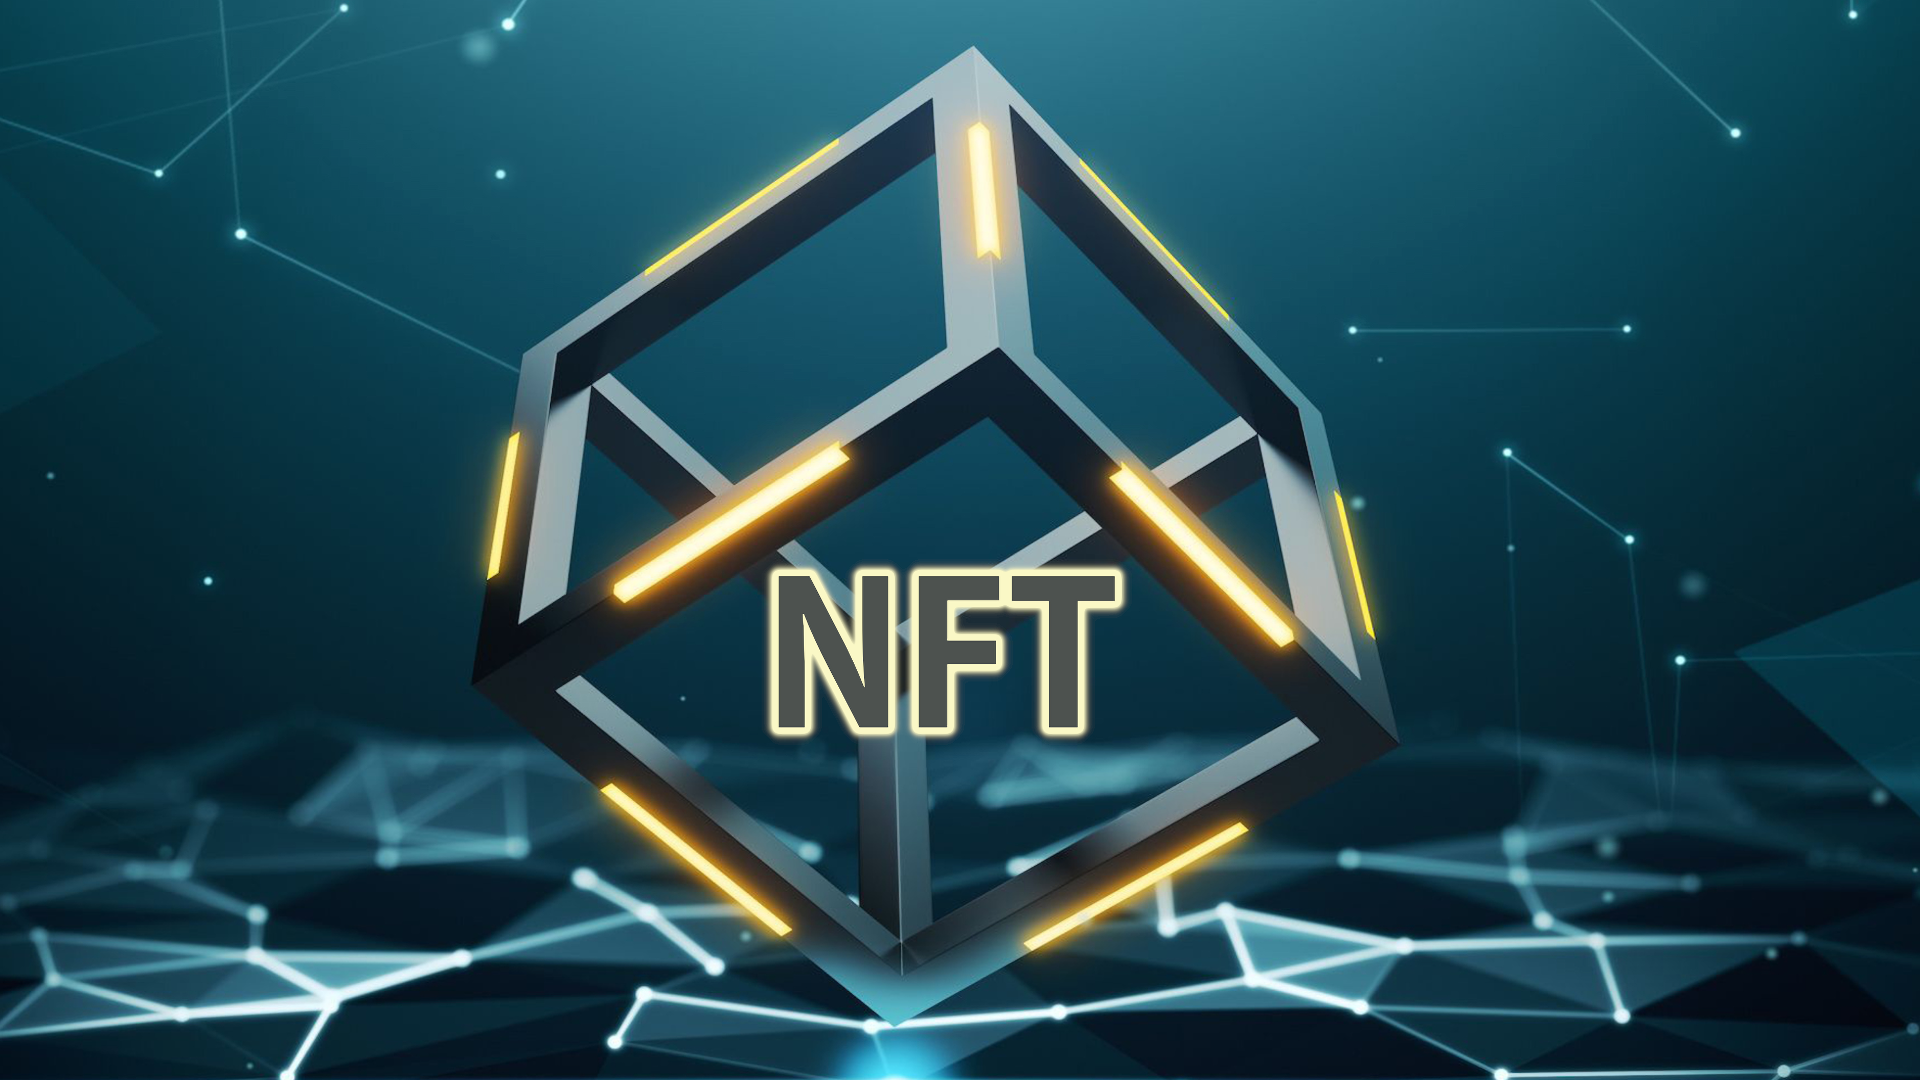 Share 62+ nft wallpaper latest - in.cdgdbentre